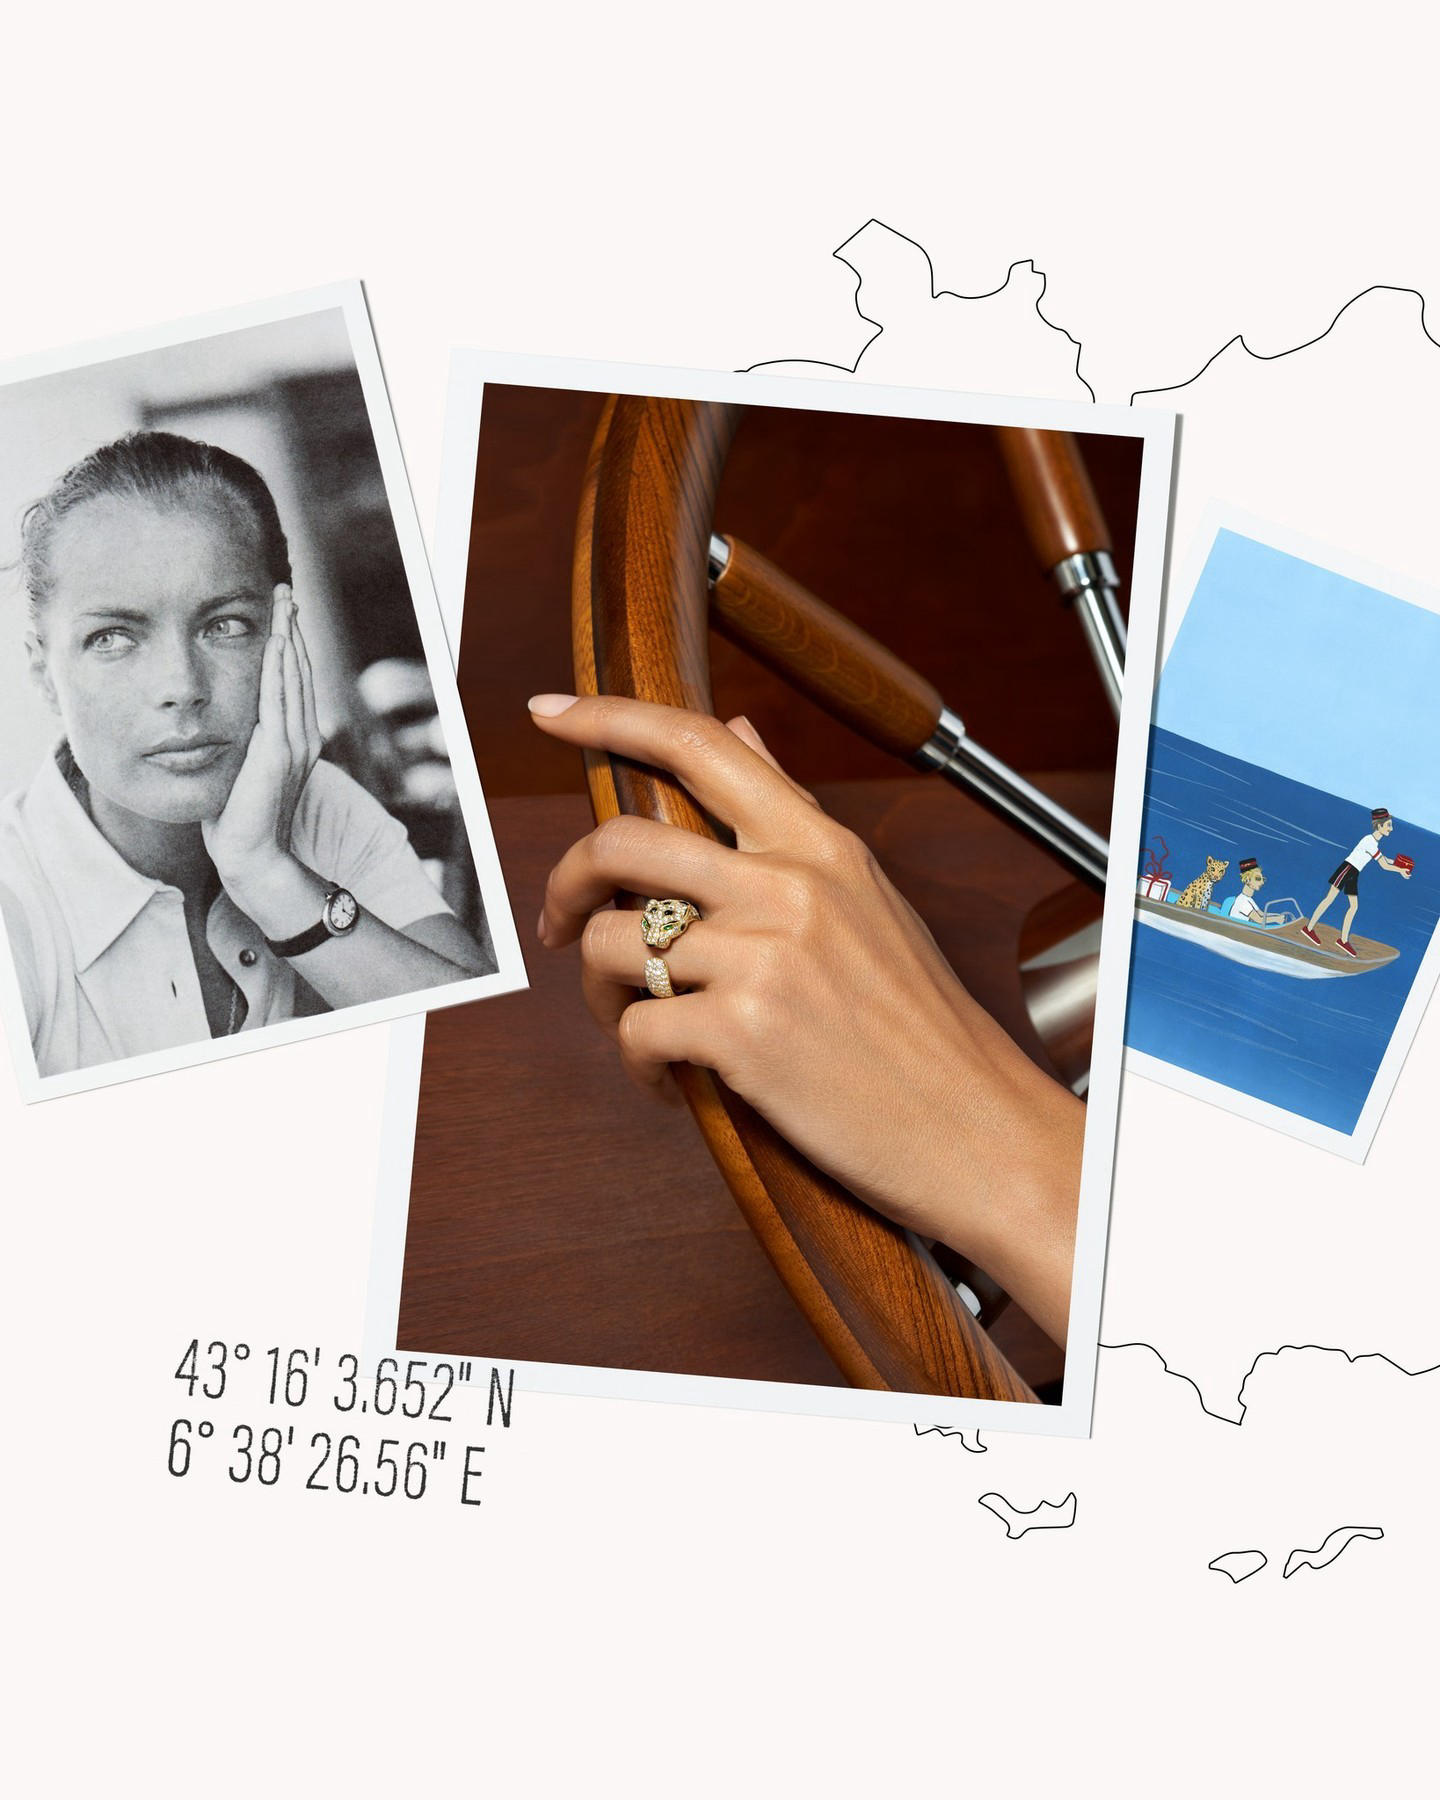 image  1 Cartier Official - Romy Schneider chose #CartierWatchmaking for timeless St Tropez style